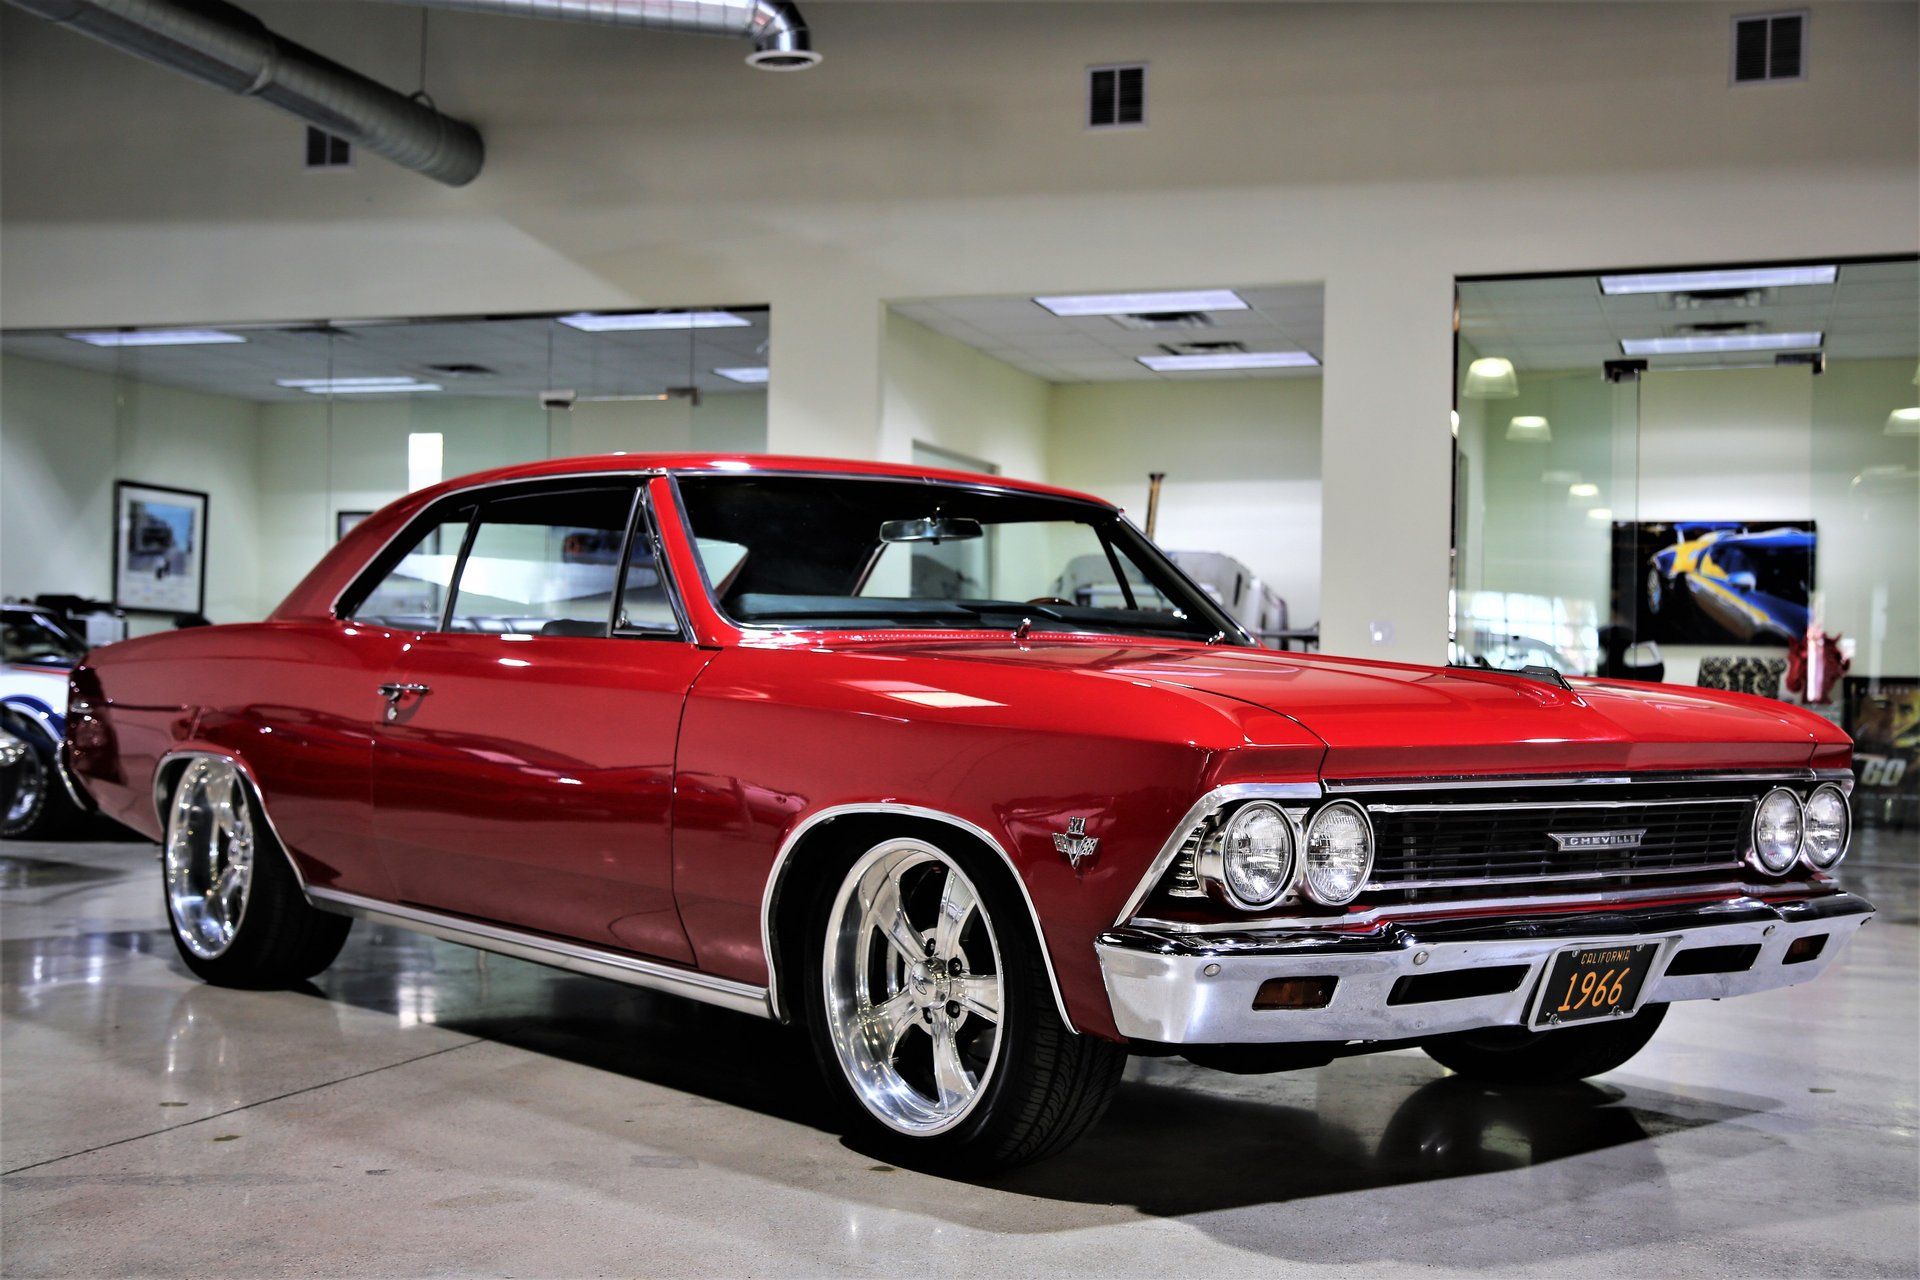 The 1966 Chevrolet Chevelle is a classic car to restore and pimp up.